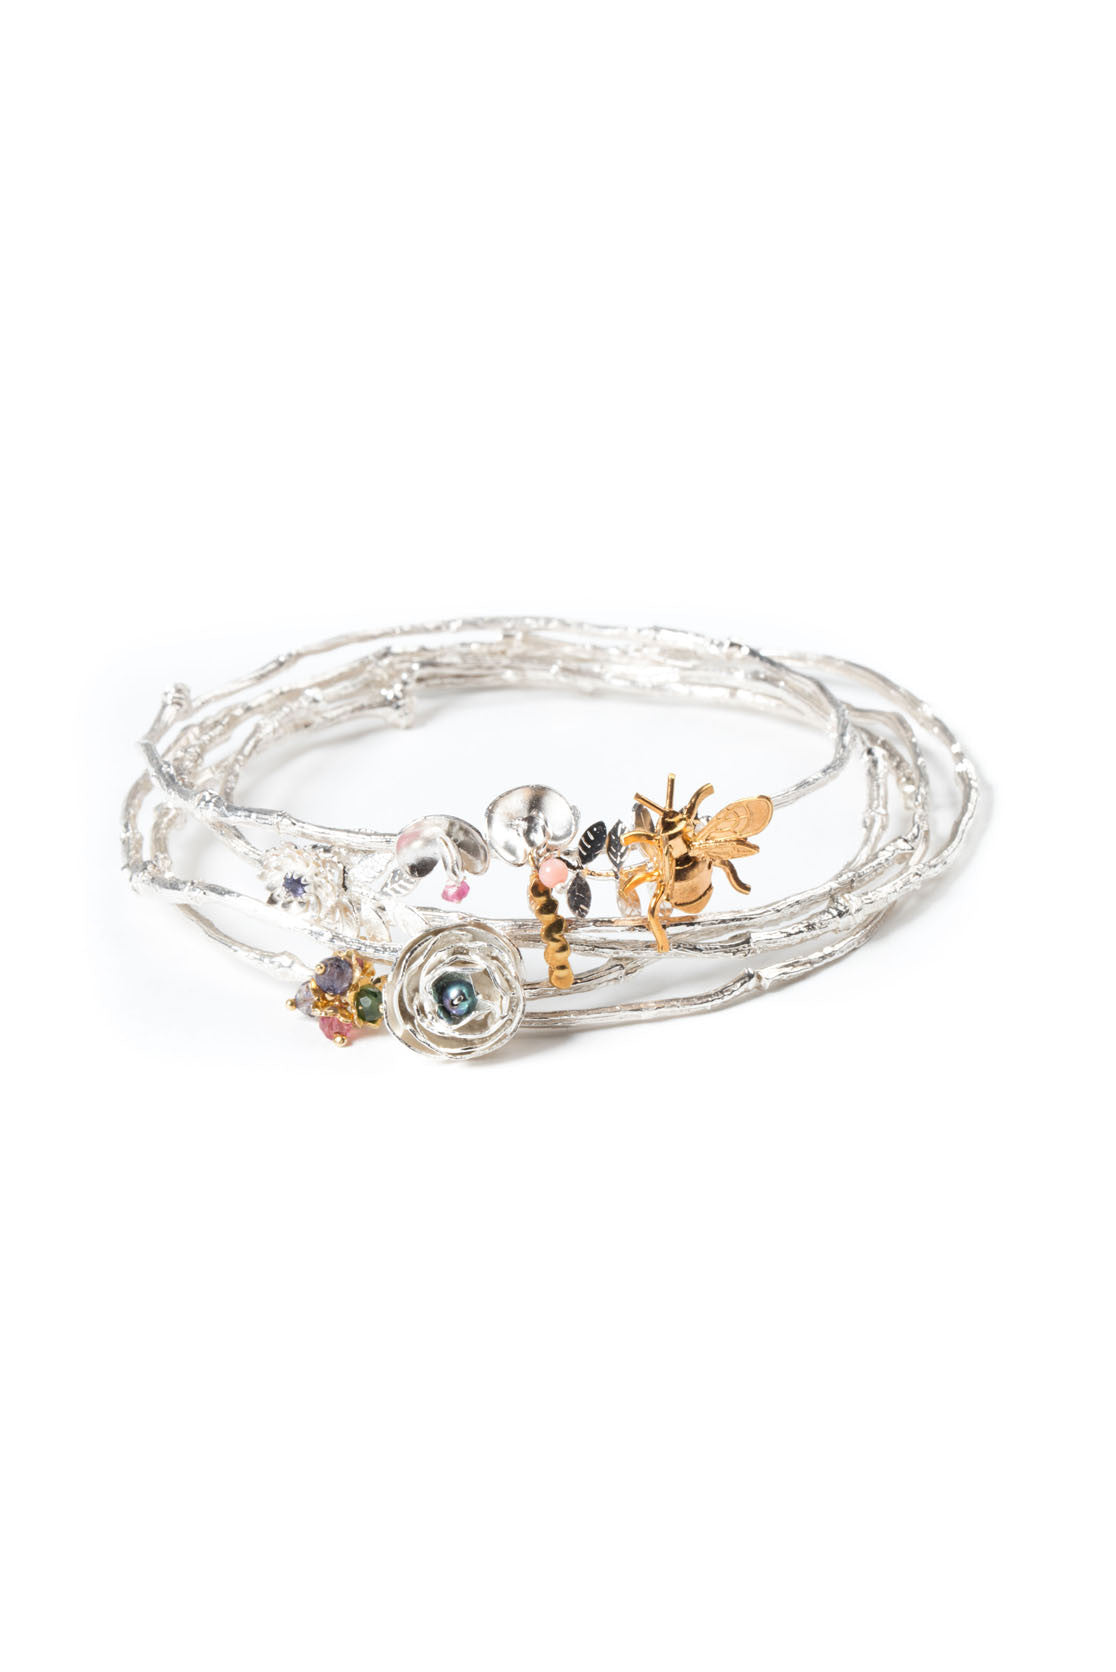 Forget-me-not Bangle